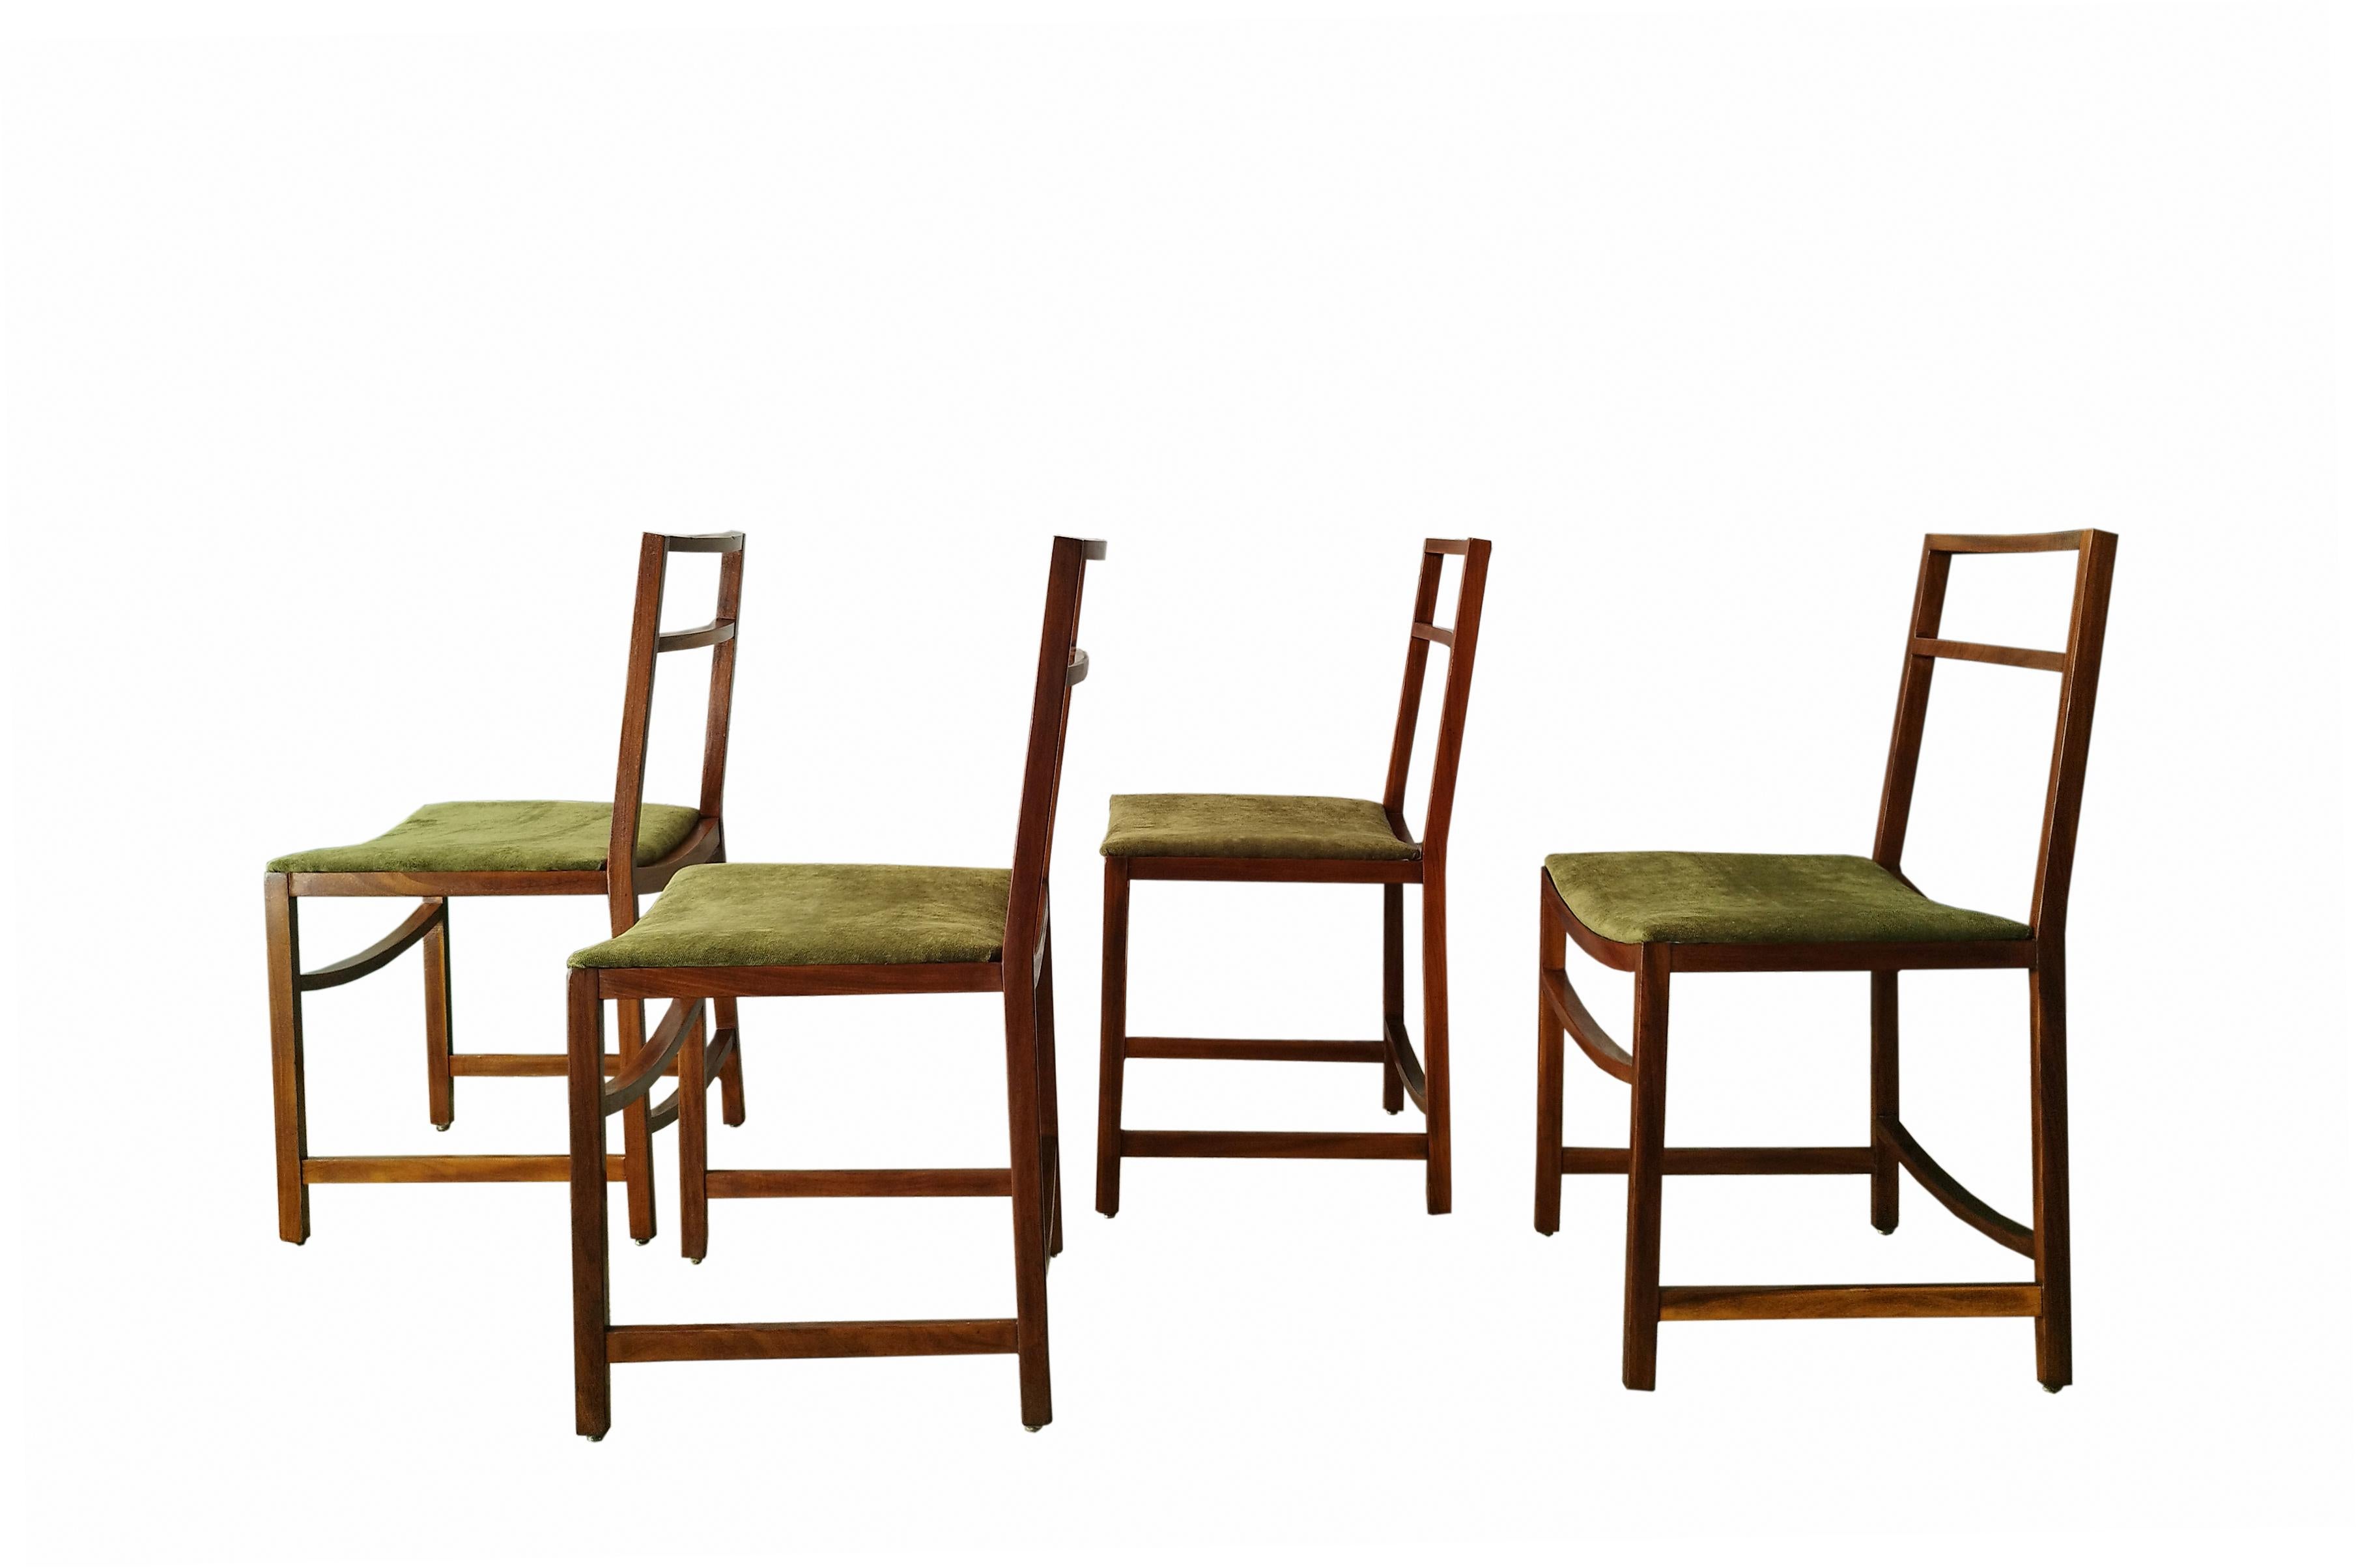 Mid-Century Modern Renato Venturi for Mim Set of 4 Green Fabric and Wood Chairs, Italy 1960s